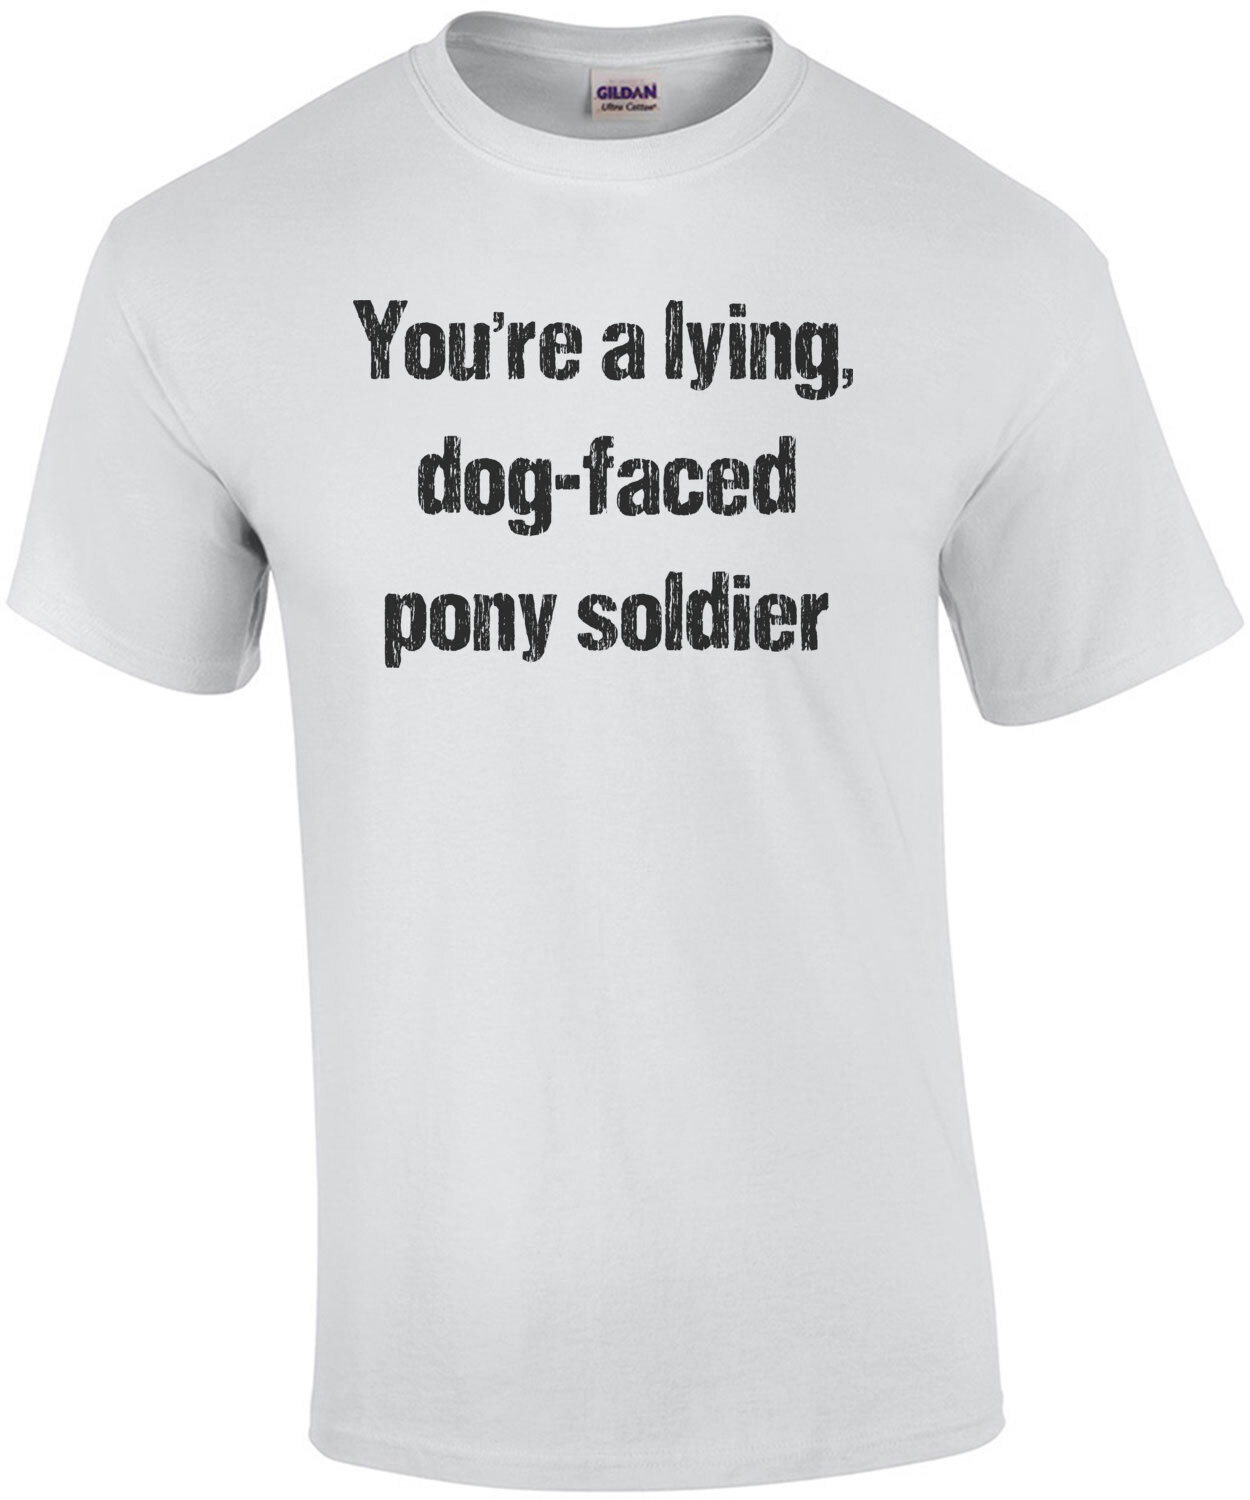 Lying Dog Faced Pony Soldier Shirt